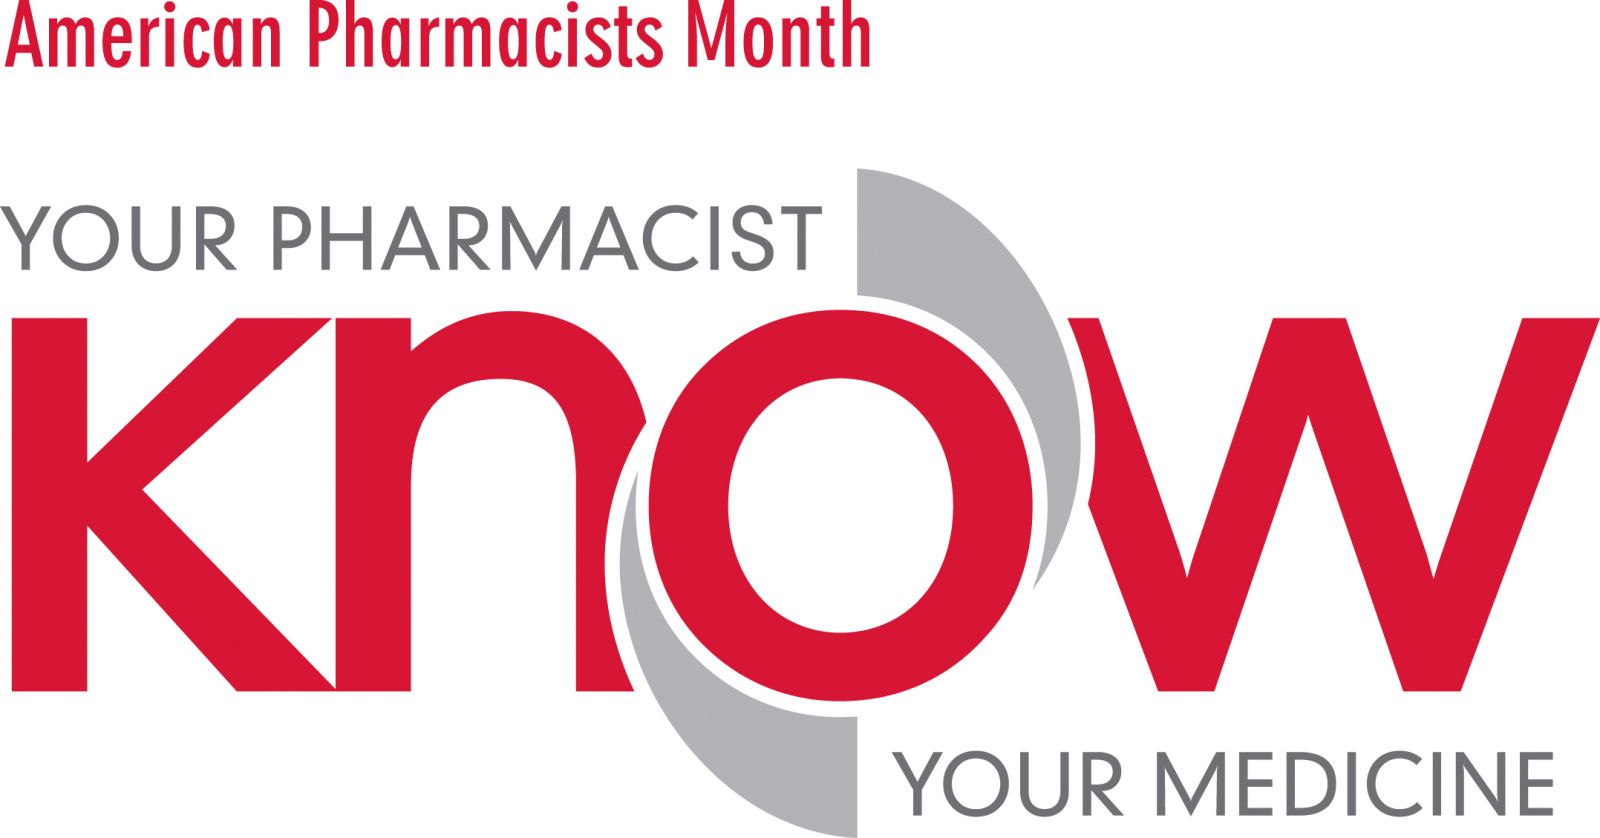 October is American Pharmacists Month